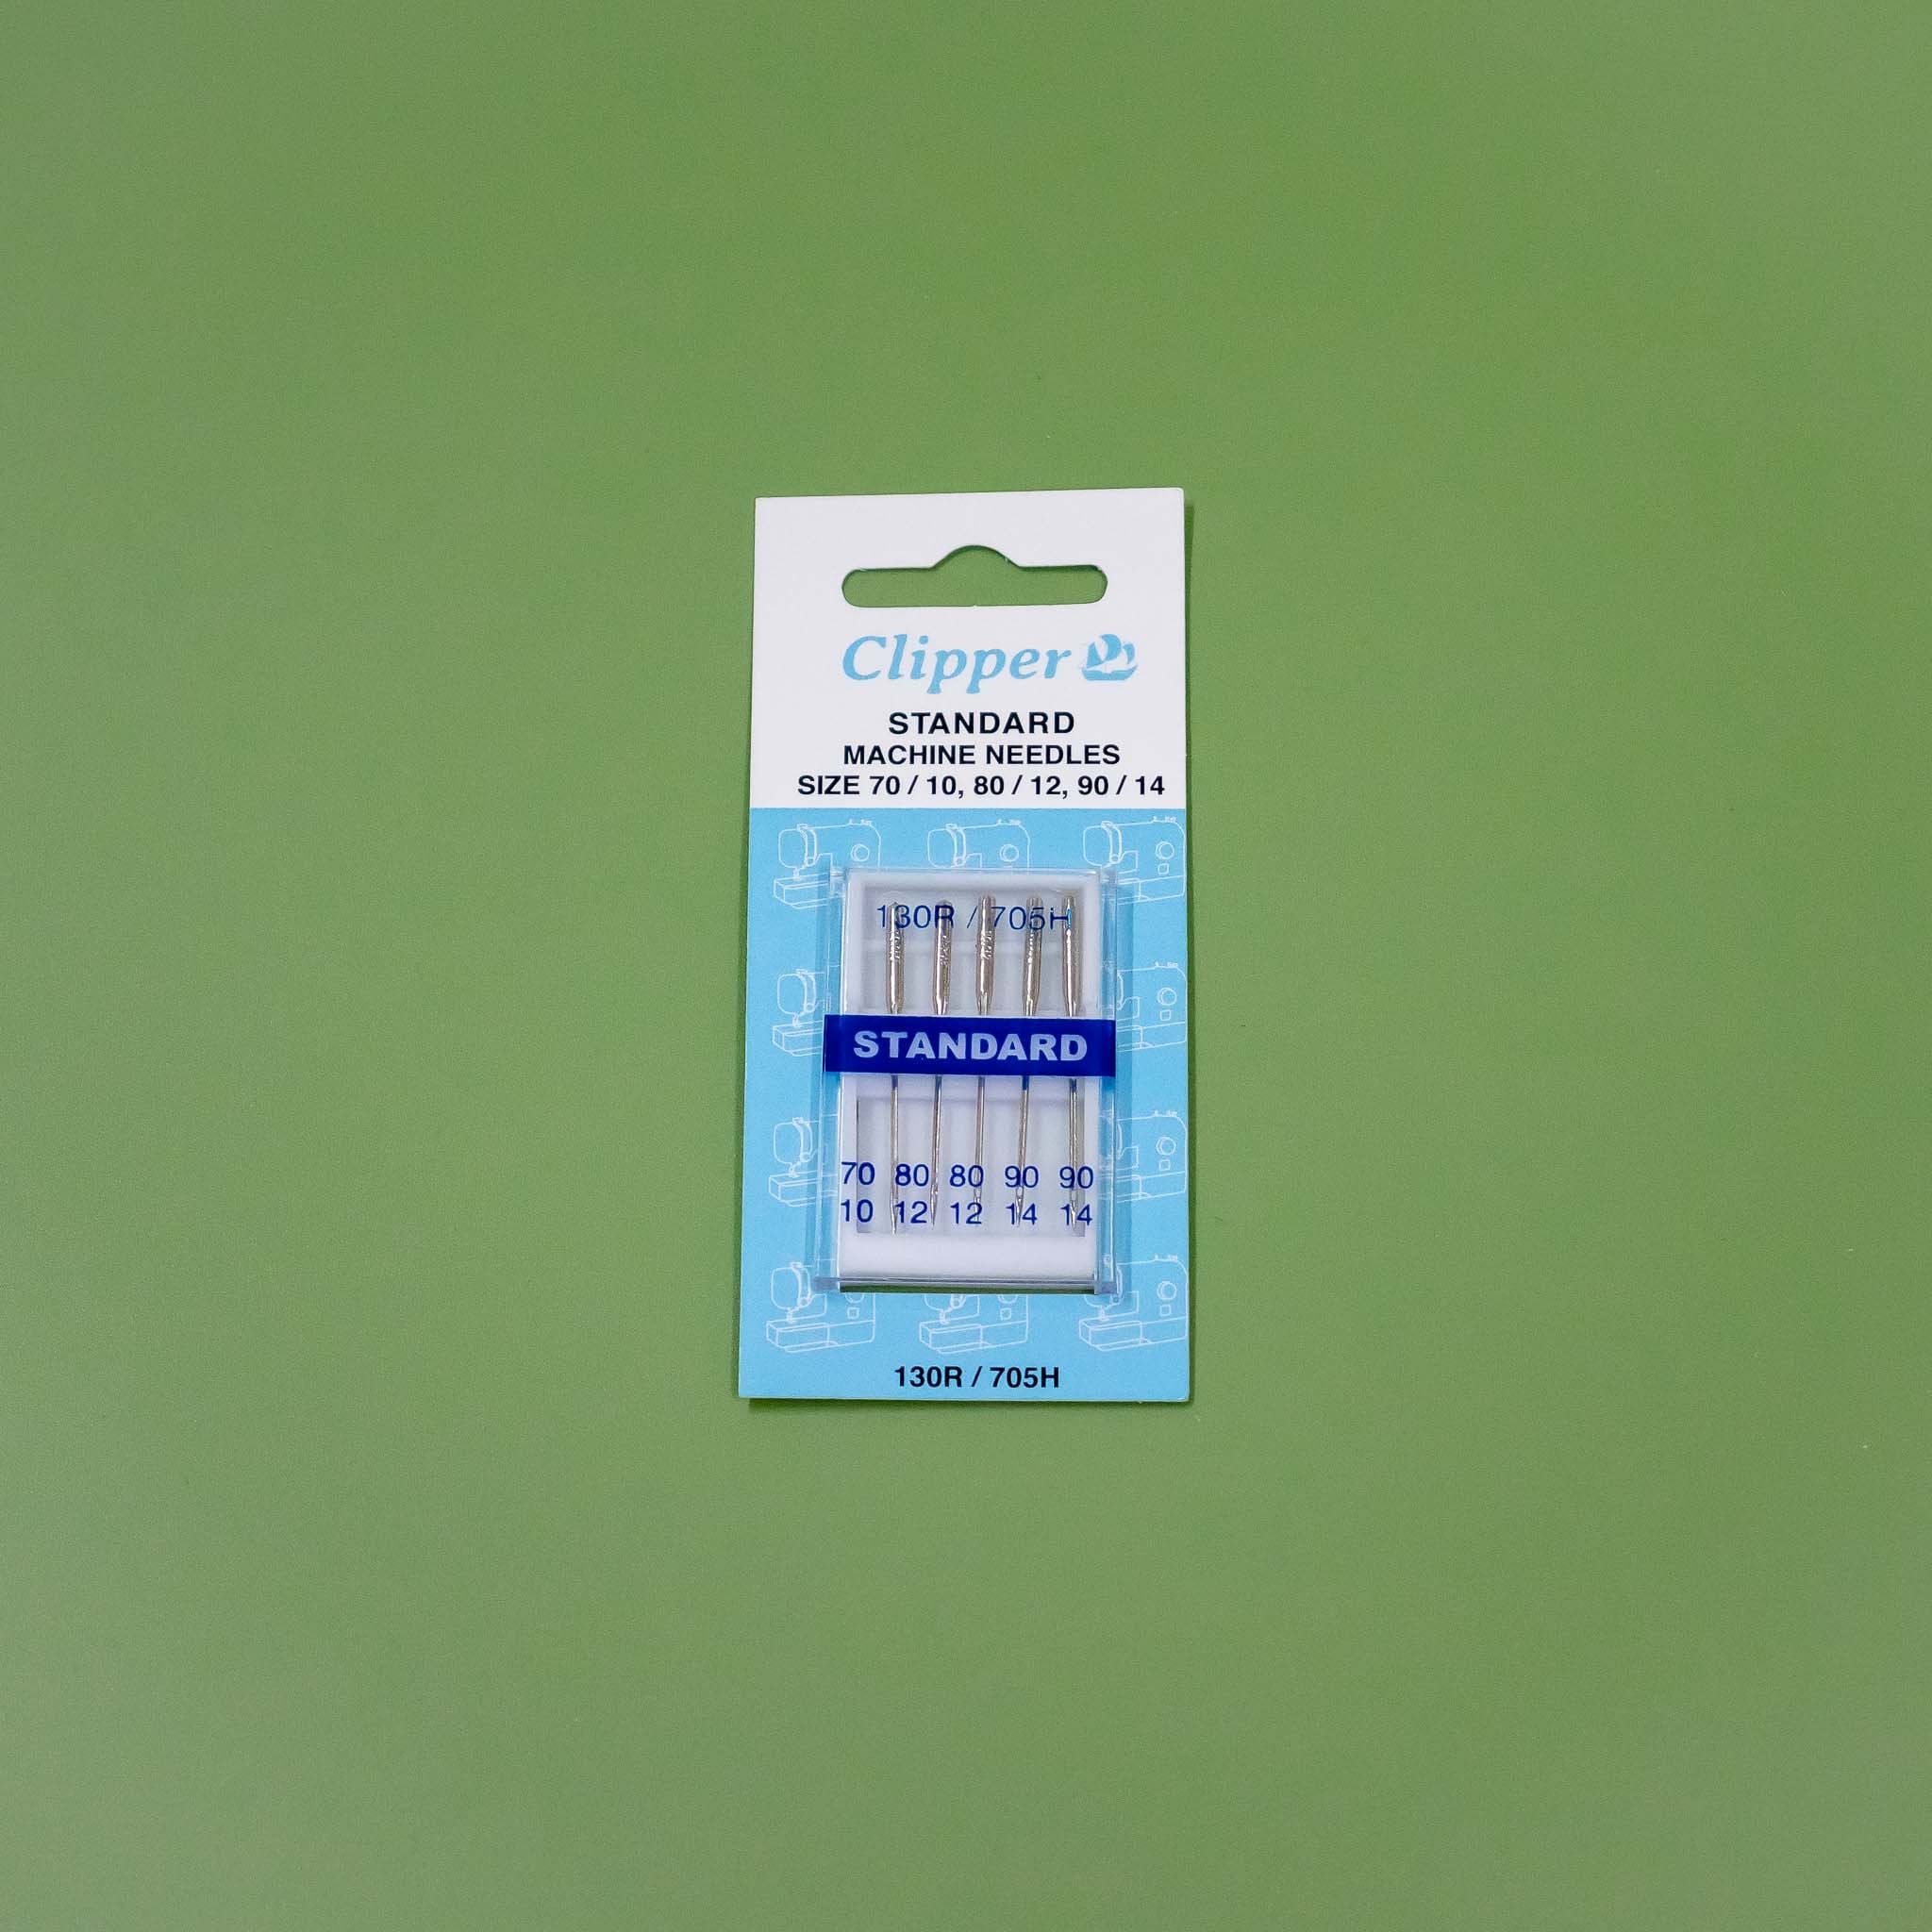 Singer needles for sewing machine assortment 10 needles 70 80 90 100